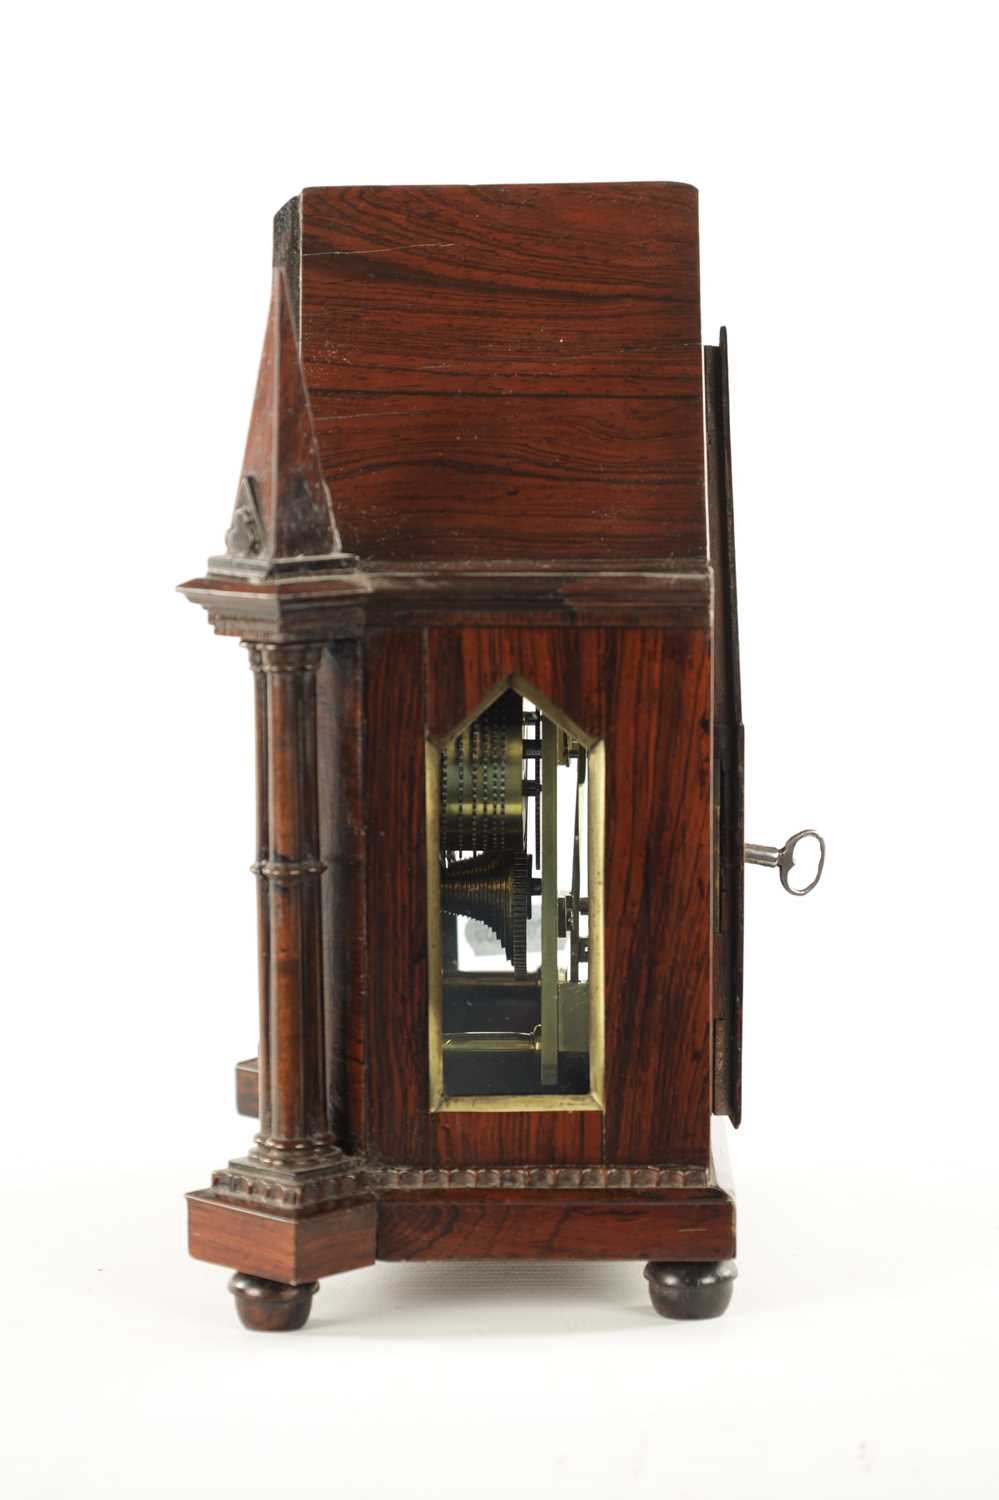 VINER, LONDON. A SMALL LATE REGENCY ENGLISH ROSEWOOD FUSEE MANTEL CLOCK - Image 4 of 11